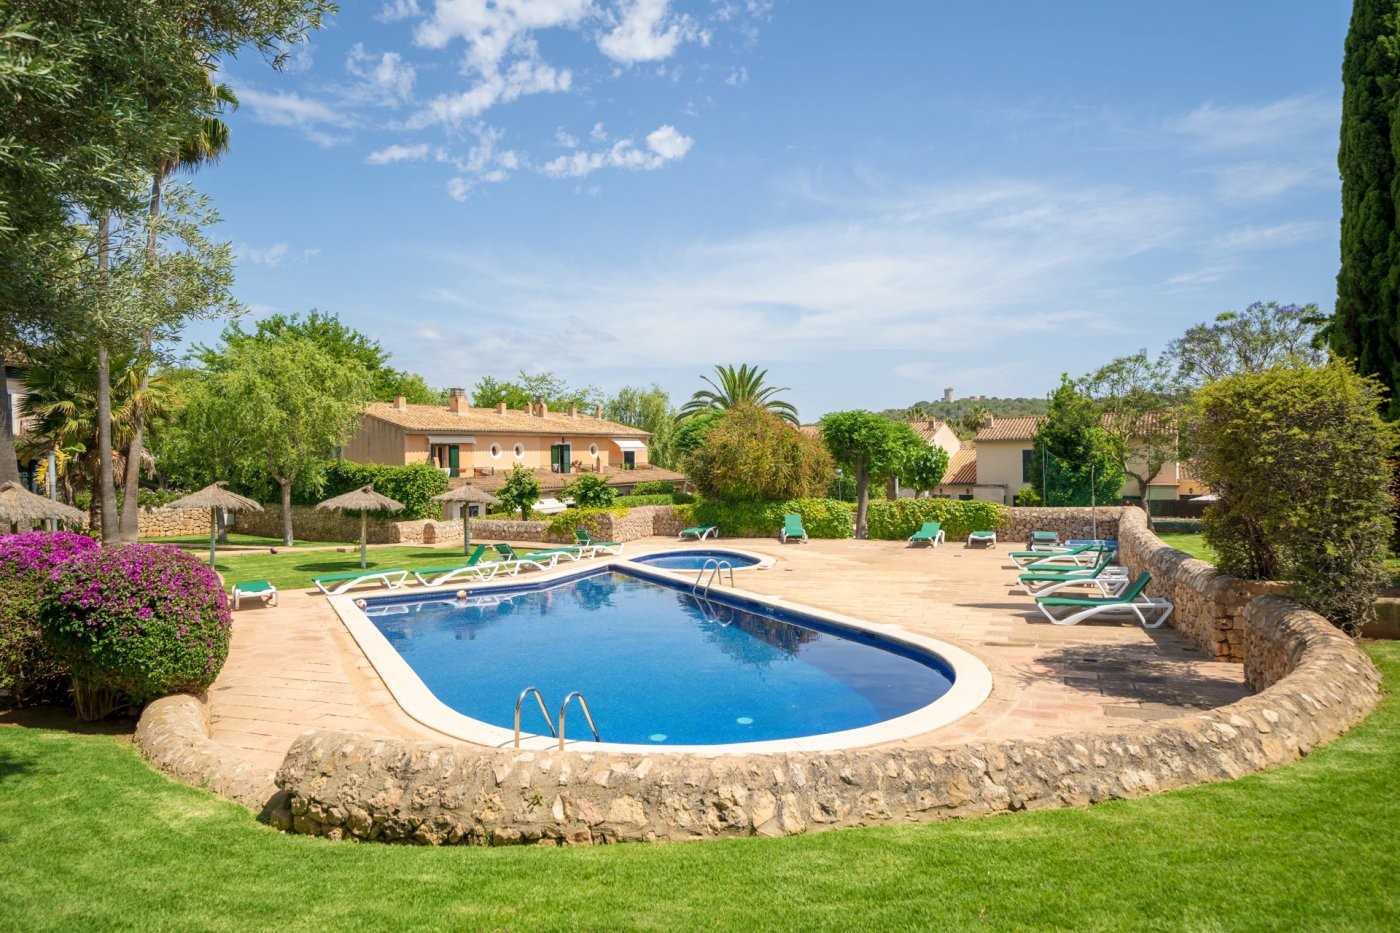 Exclusive semi-detached house located in the privileged area of Sa Teulera, the green lung of Palma.